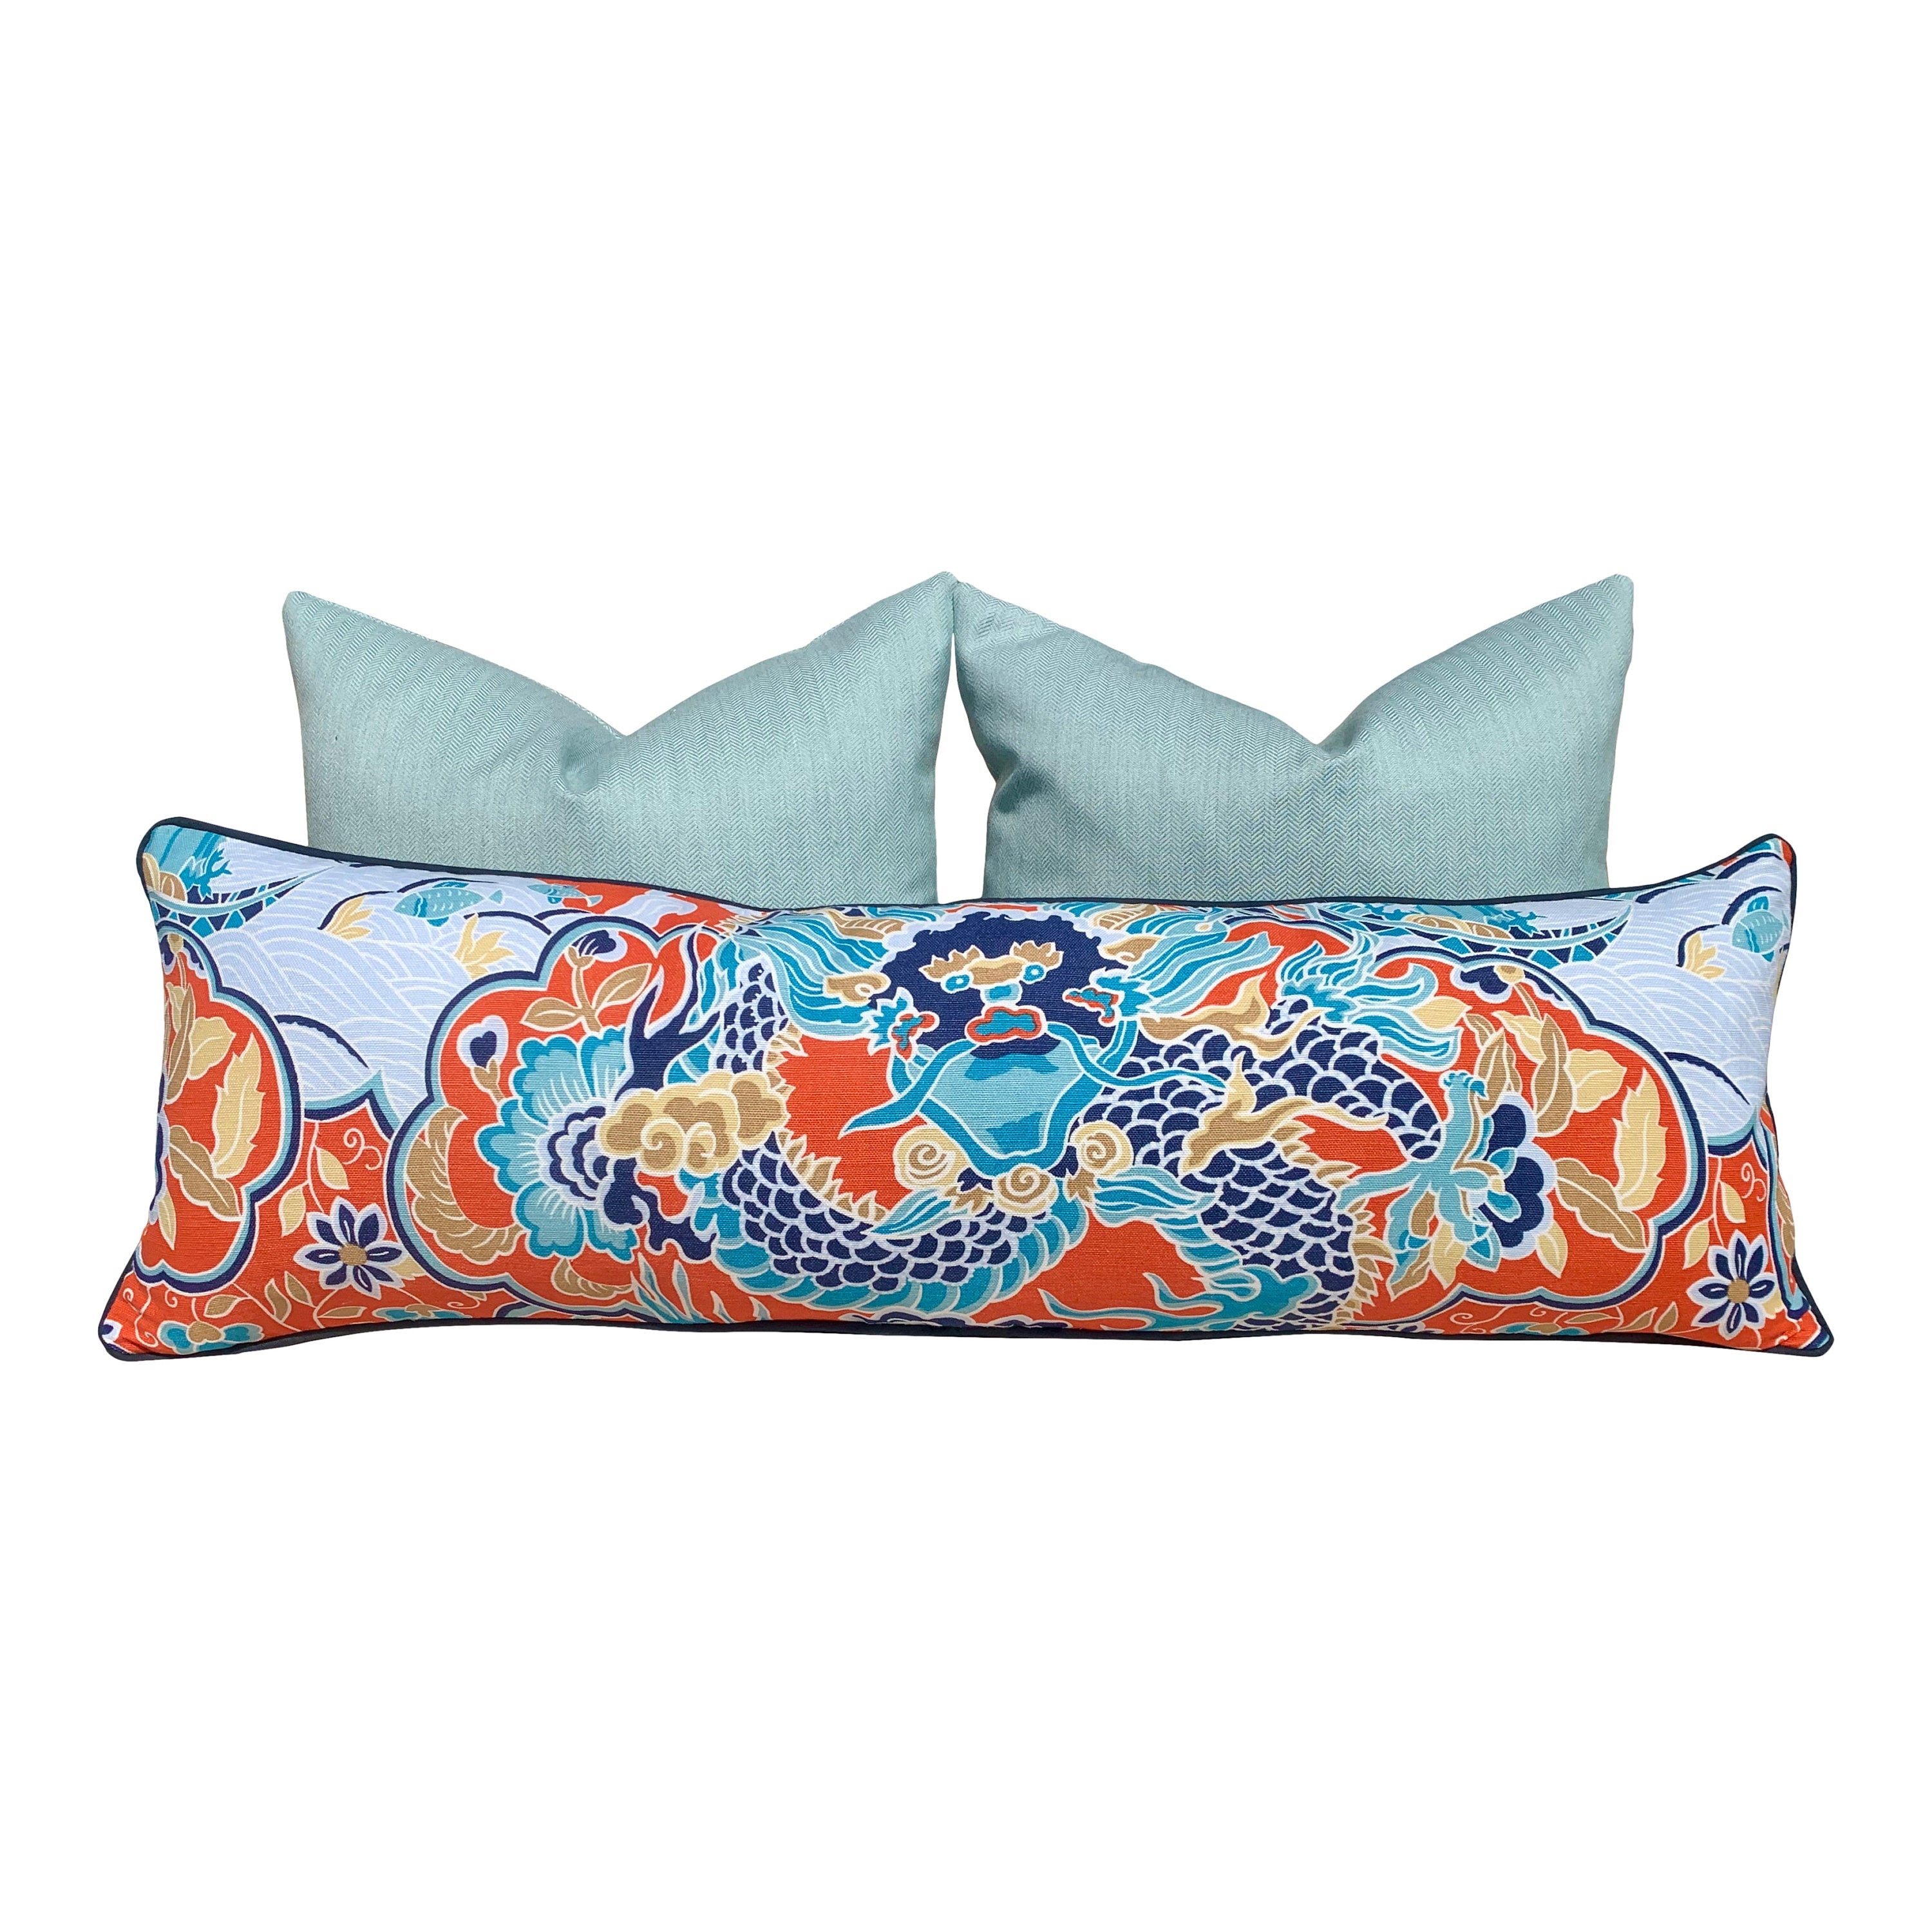 Thibaut Imperial Dragon Pillow in Orange and Turquoise. Decorative Lumbar Pillow